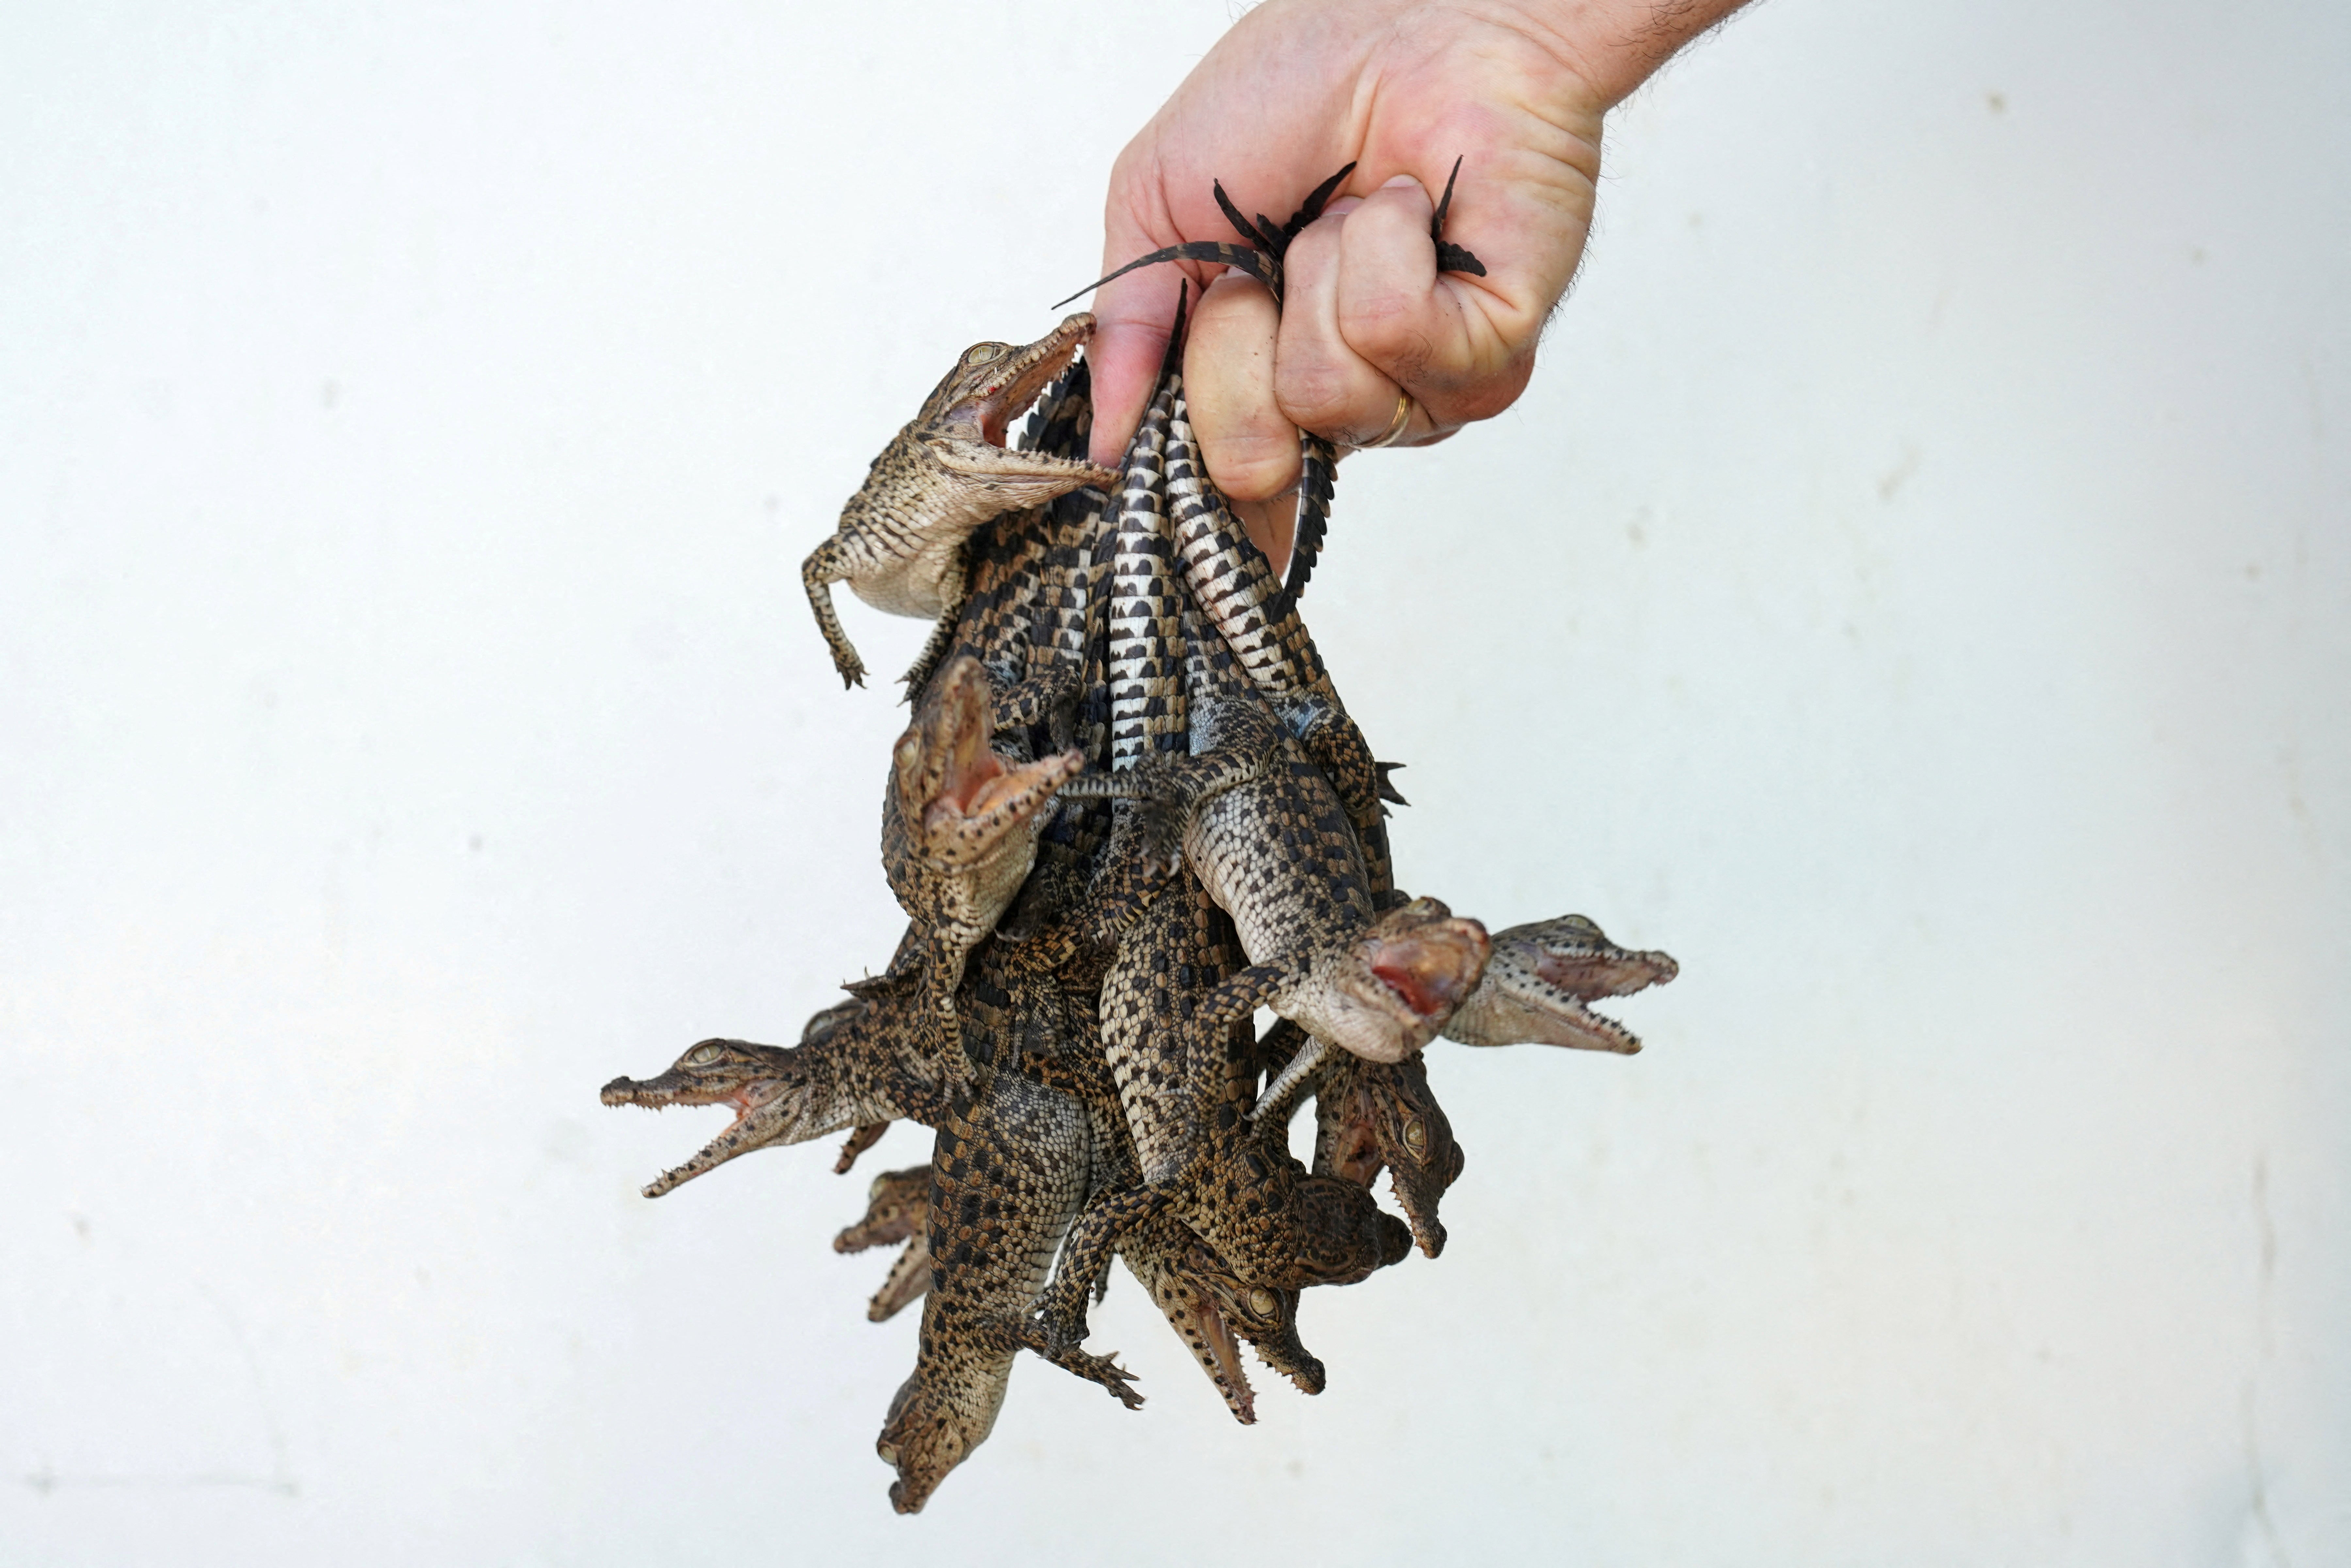 A biologist poses with newly-hatched Cuban crocodiles as they are relocated at a hatchery in Cienaga de Zapata, Cuba